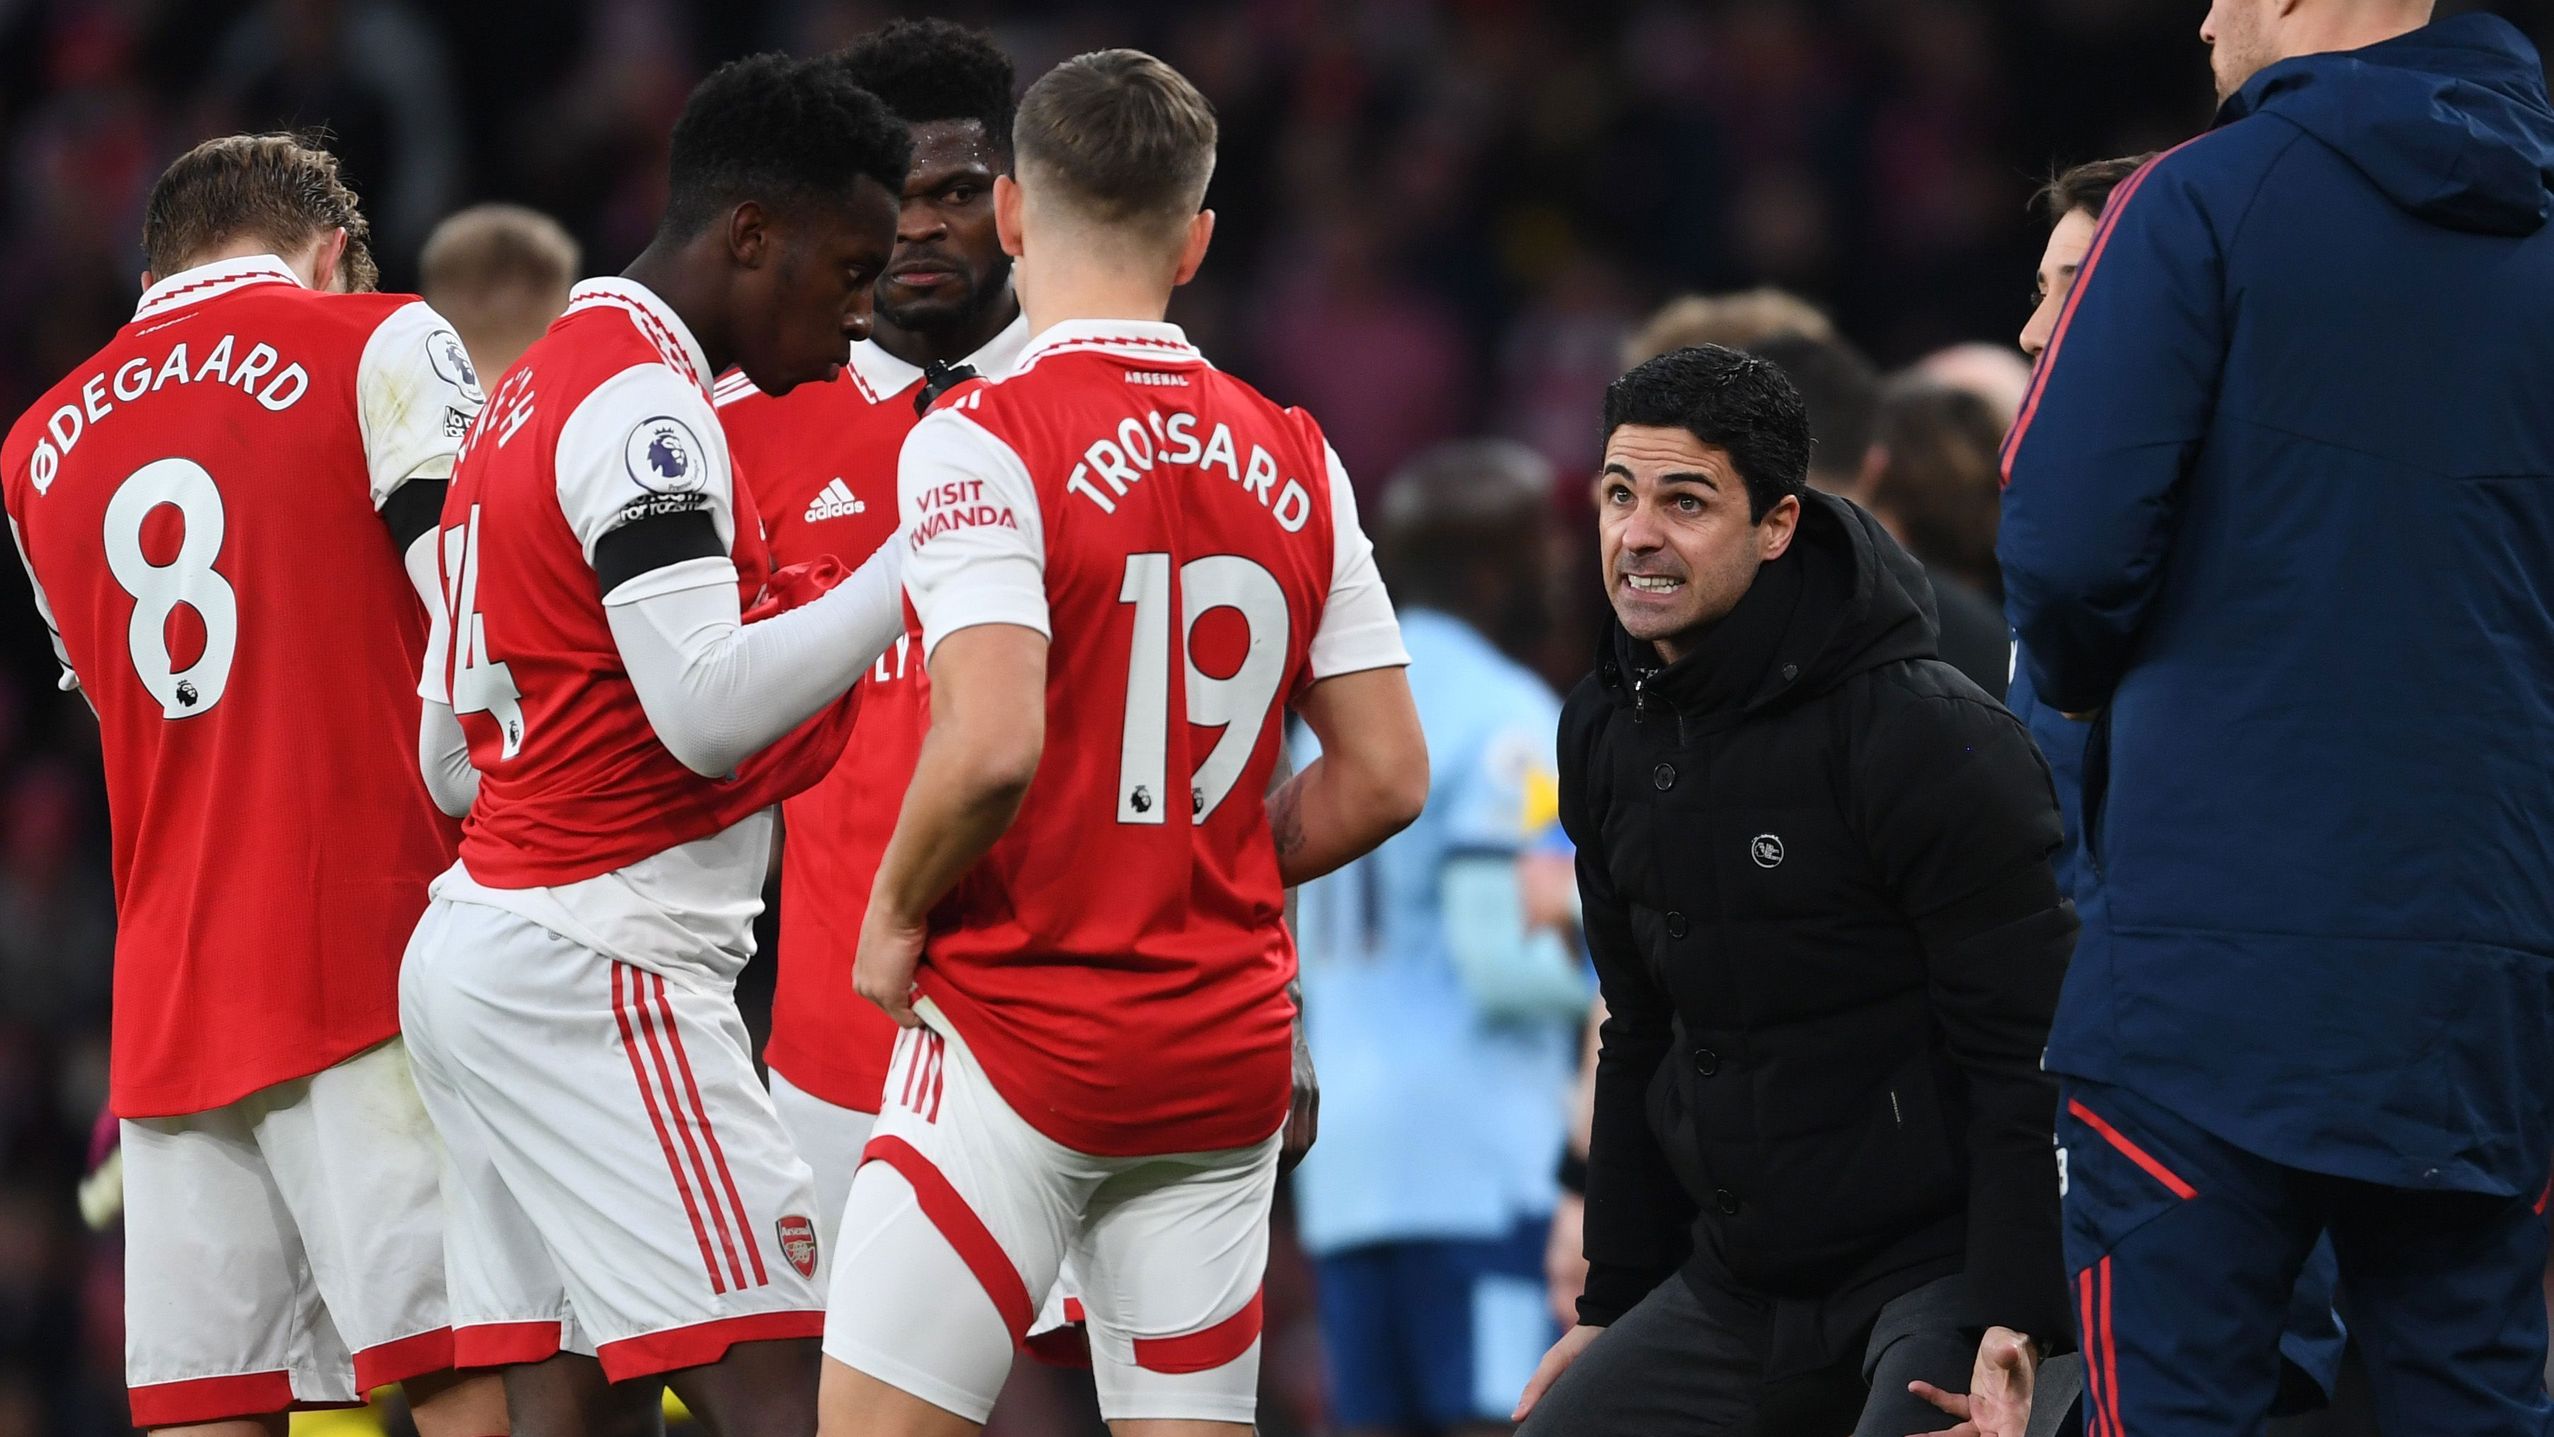 LONDON, ENGLAND - FEBRUARY 11: Arsenal manager Mikel Arteta talks to his players during the Premier League match between Arsenal FC and Brentford FC at Emirates Stadium on February 11, 2023 in London, England. (Photo by Stuart MacFarlane/Arsenal FC via Getty Images)